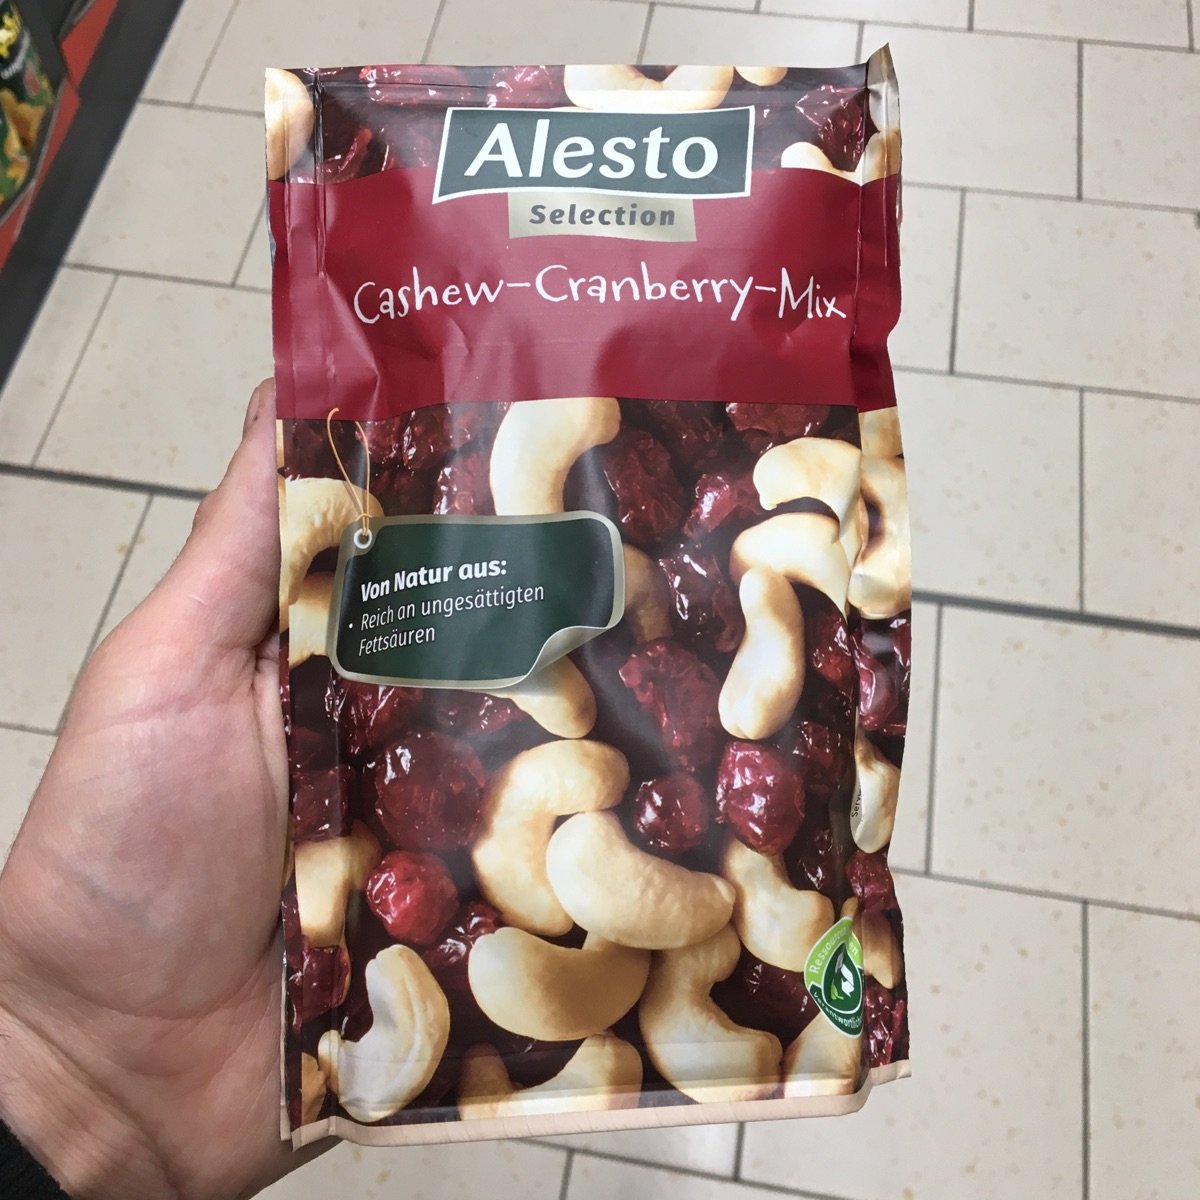 Alesto Cashew and Cranberry Mix Review | abillion